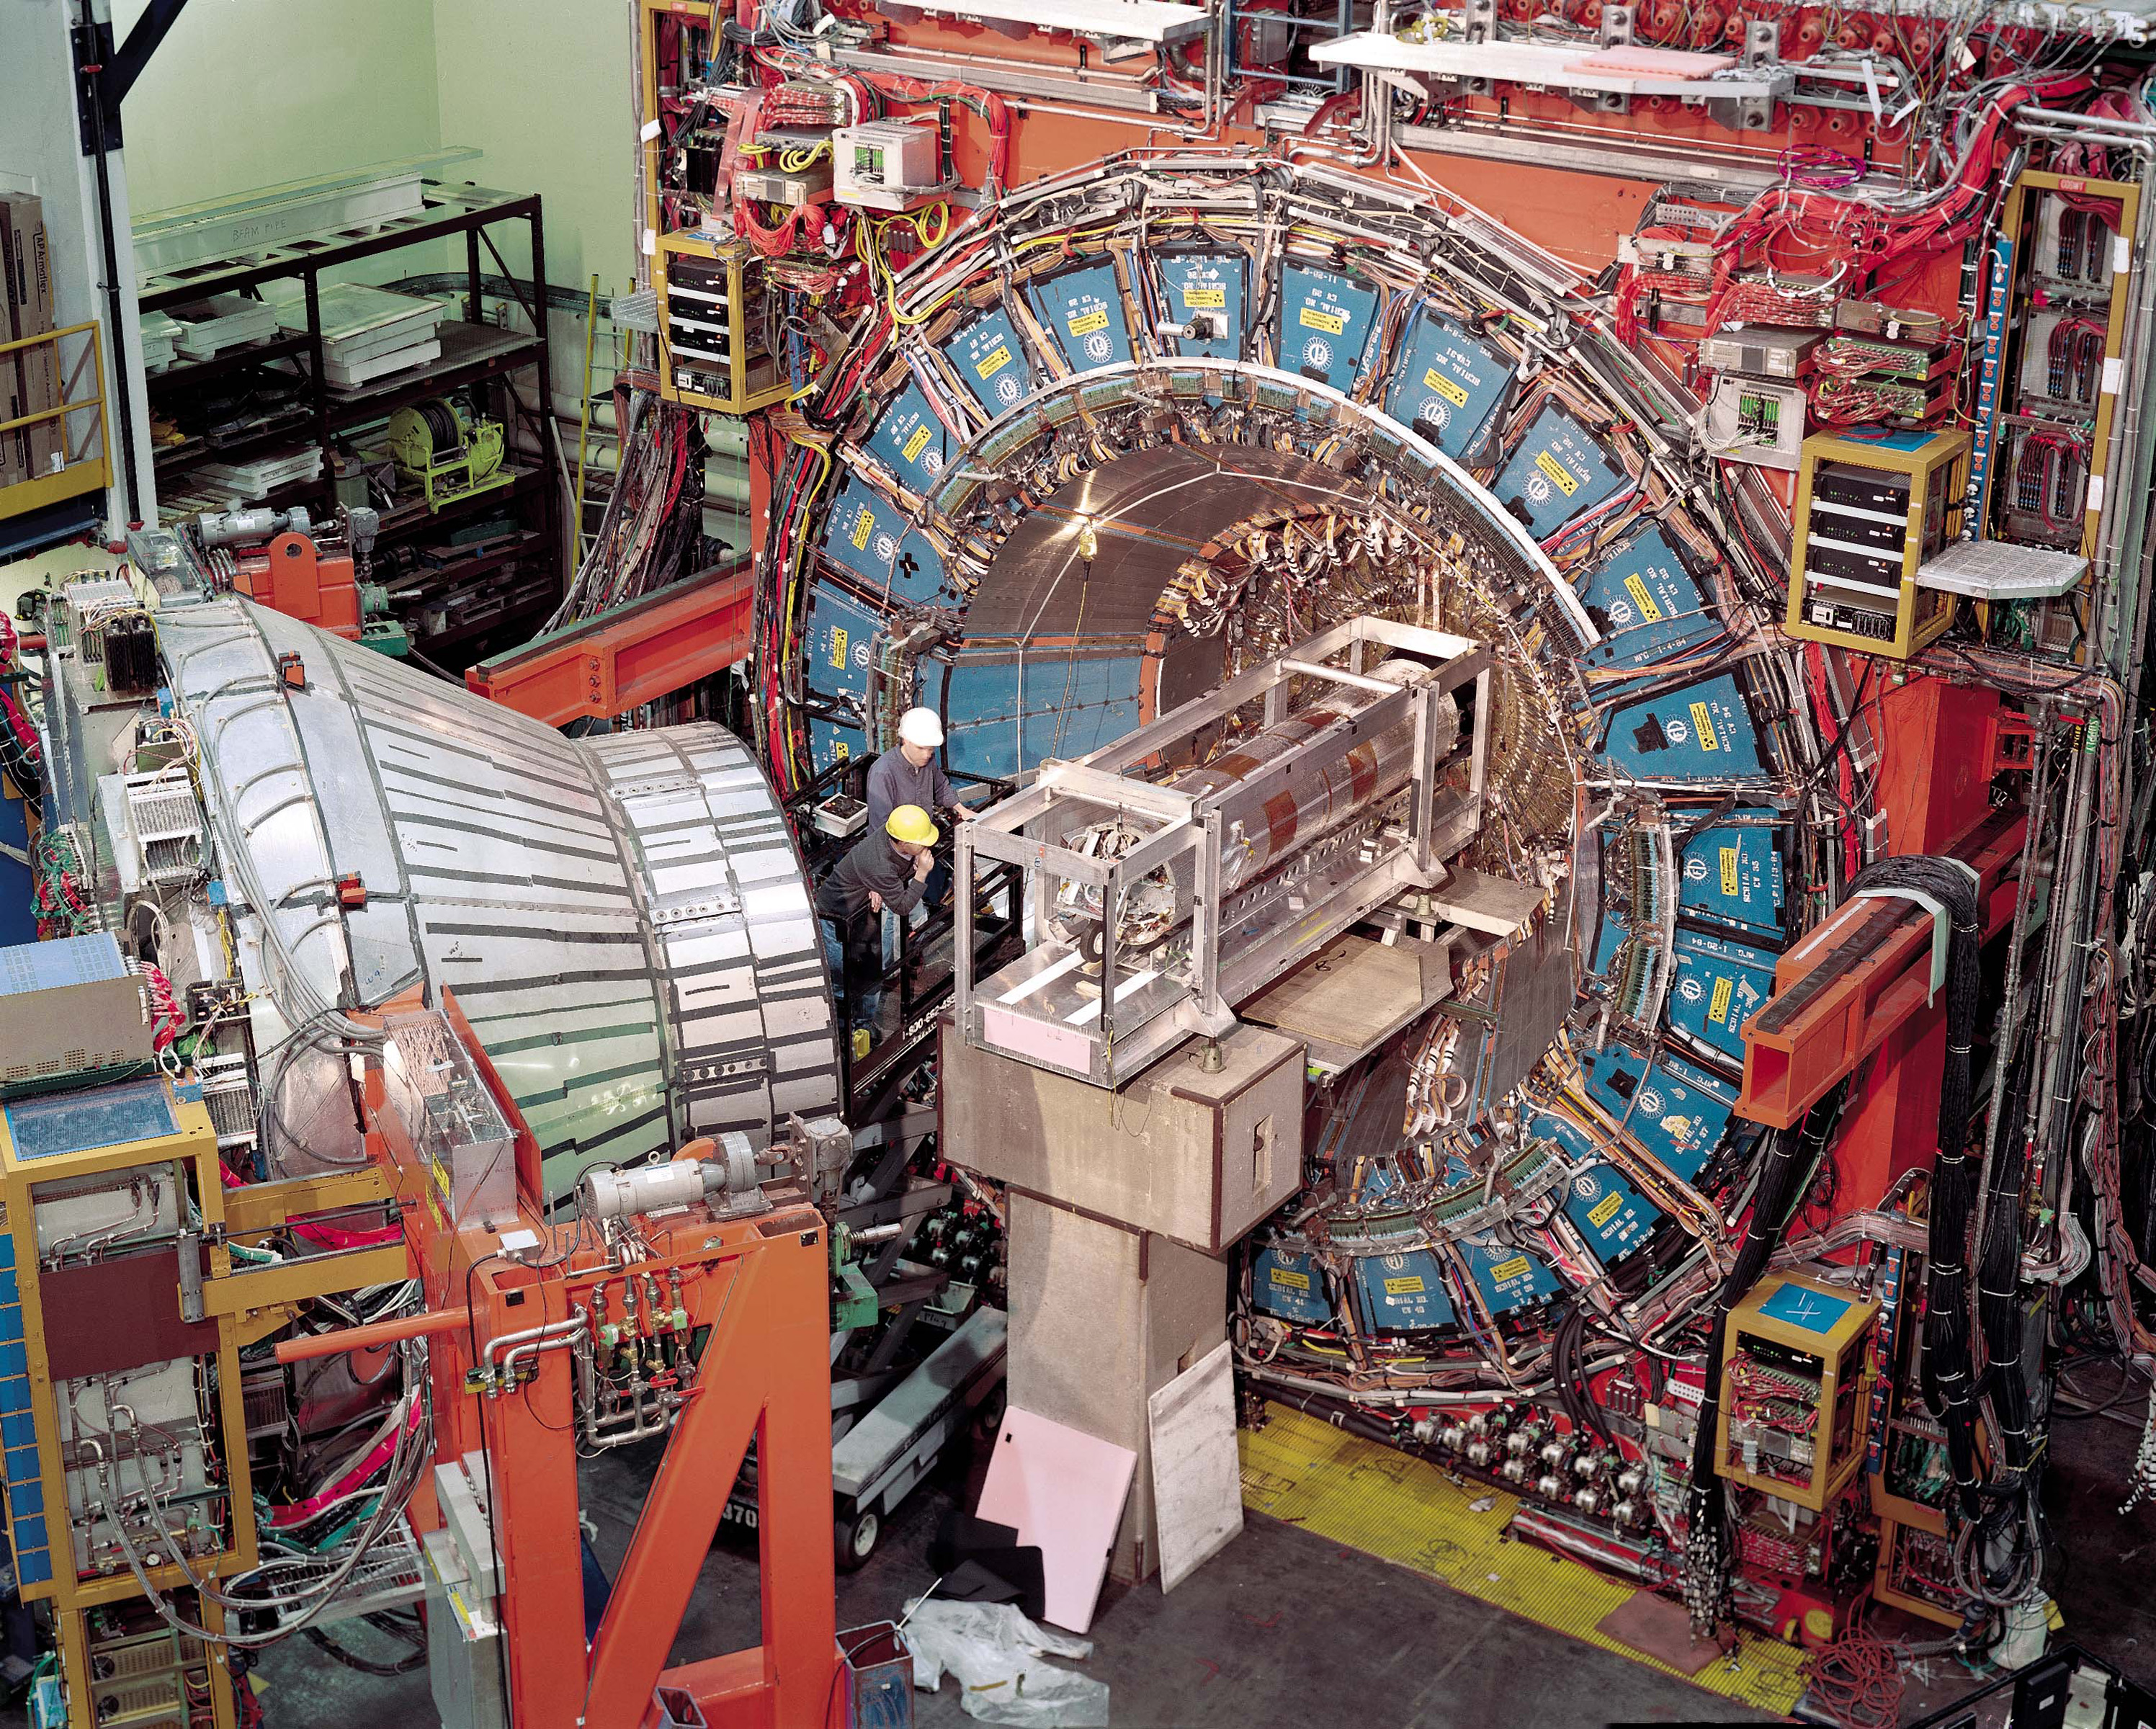 The Collider Detector at Fermilab